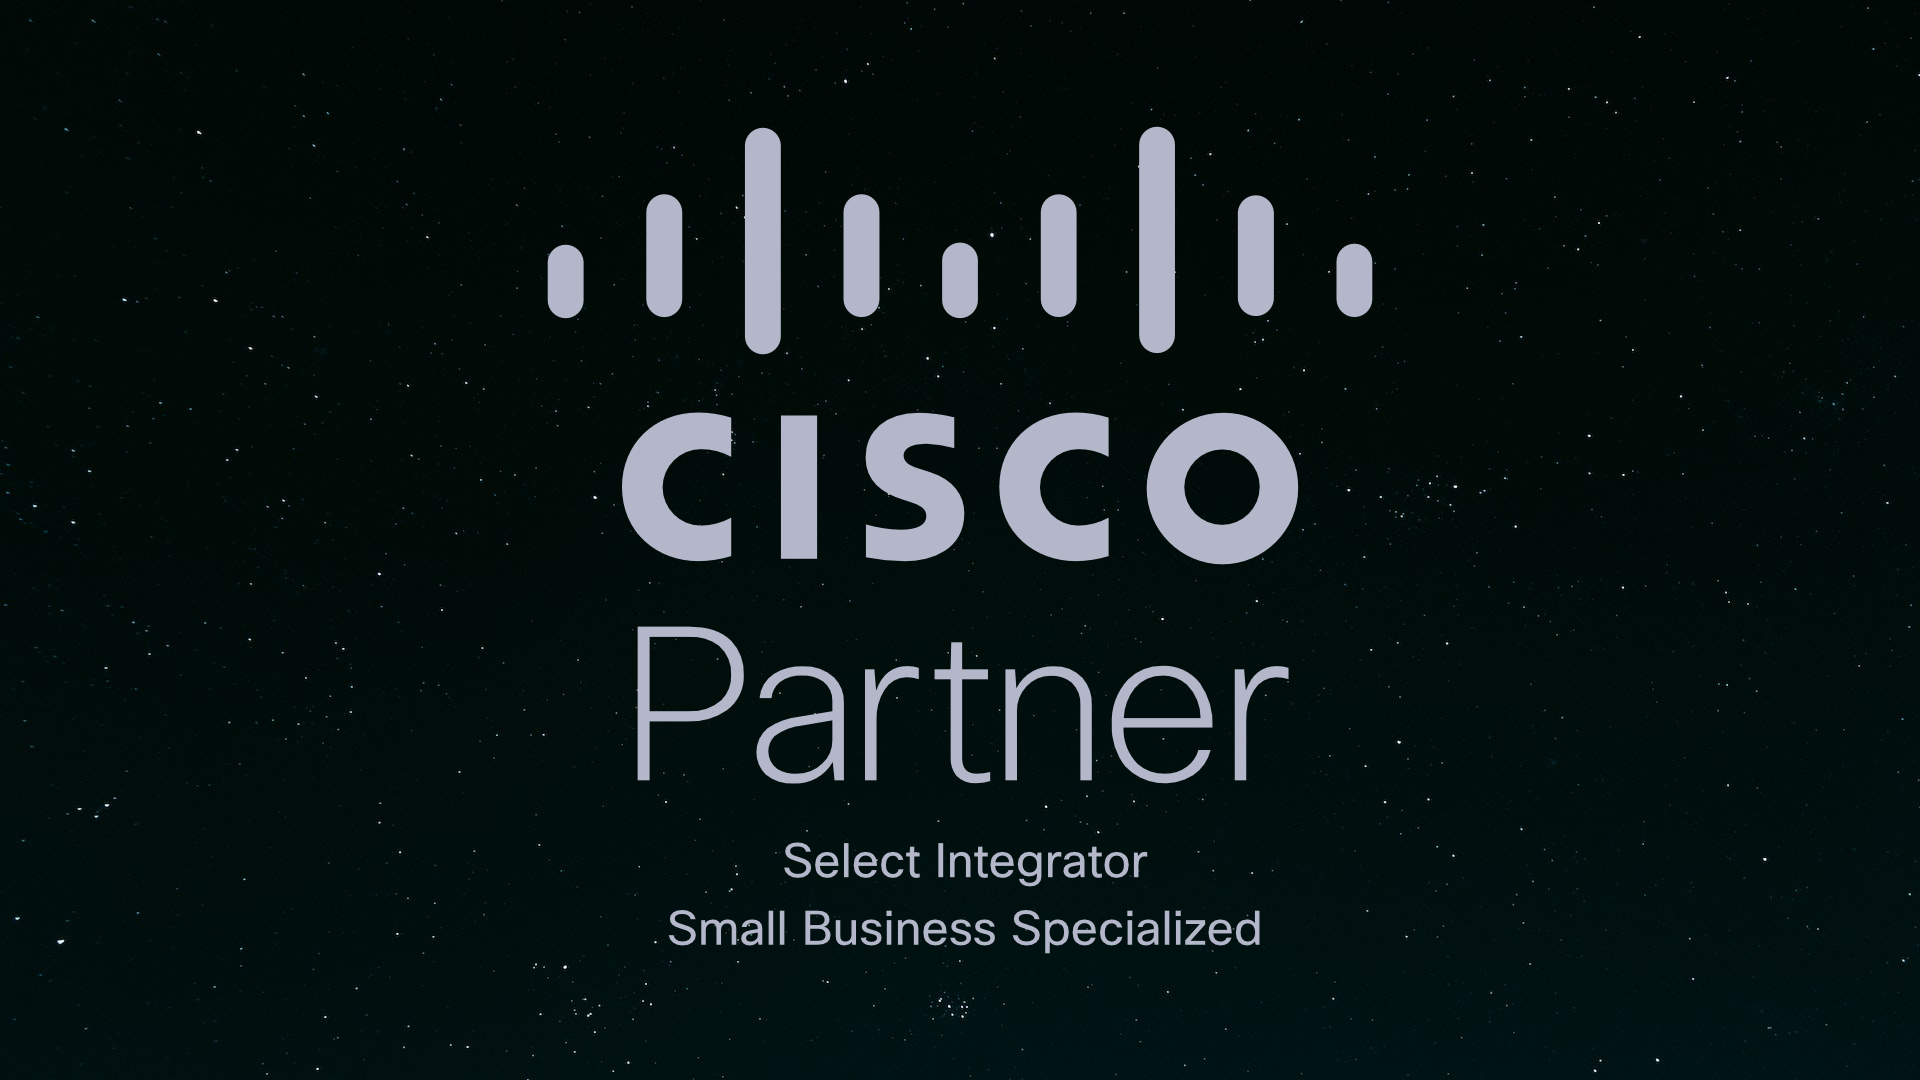 Cisco Partner Select Integrator Small Business Specialized